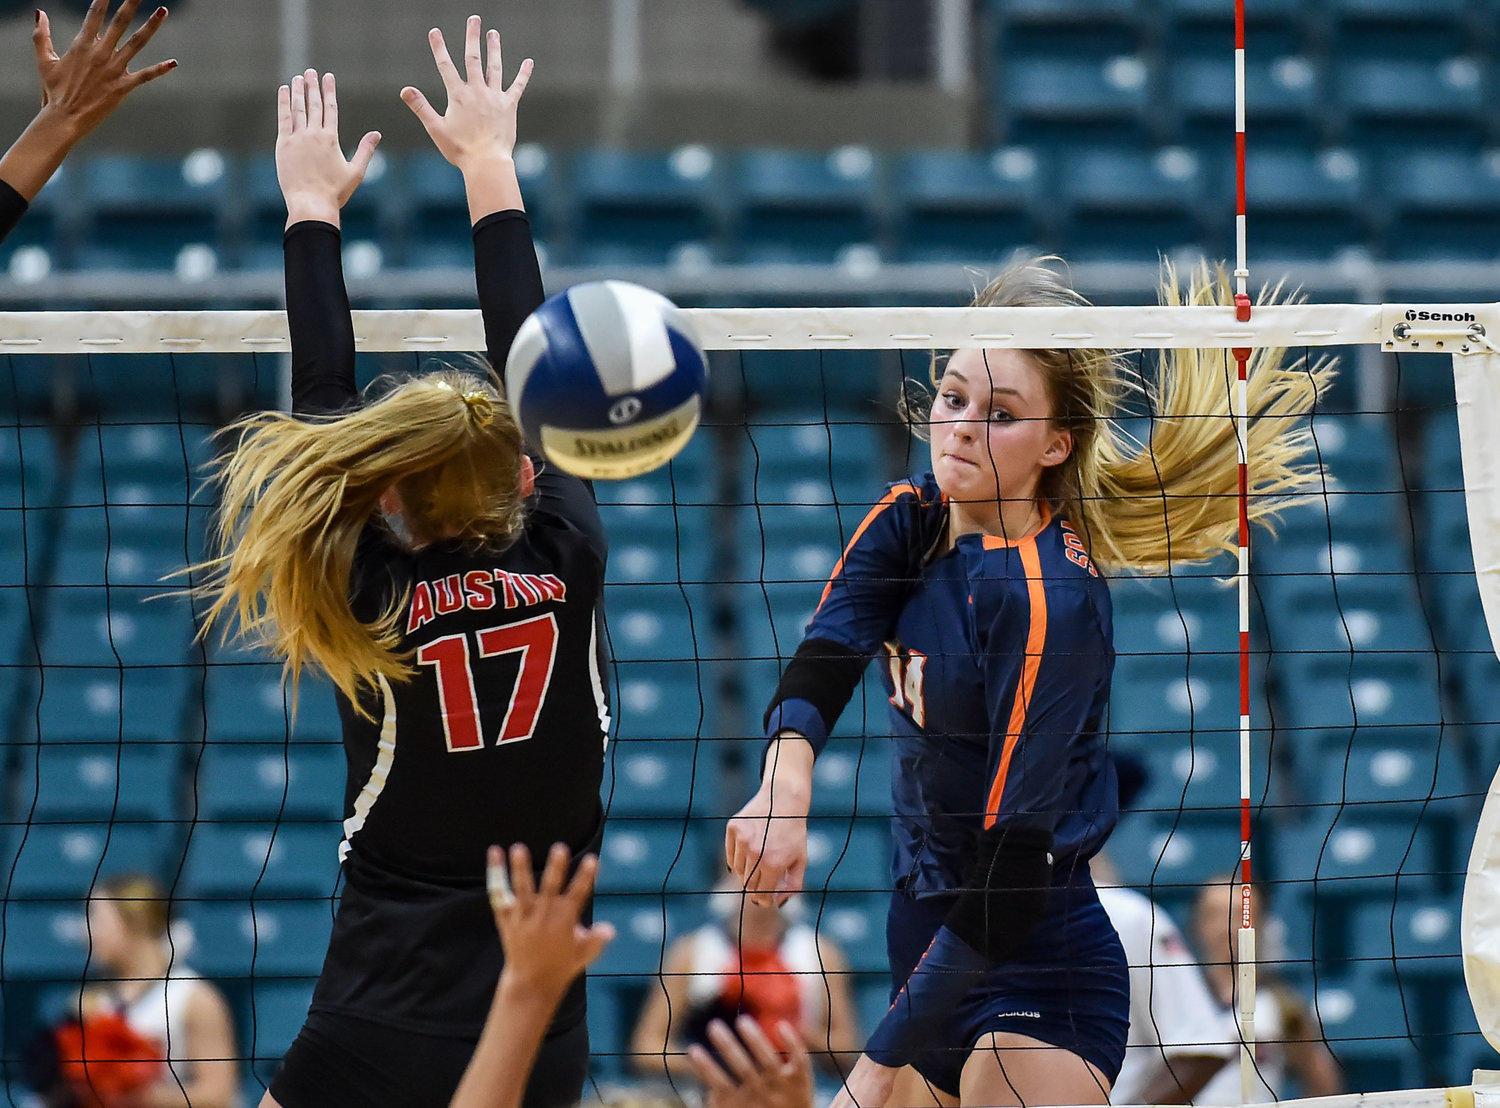 Seven Lakes’ Ally Batenhorst, voted the most outstanding hitter for District 19-6A last year, recently collected national preseason recognition from MaxPreps and the American Volleyball Coaches Association. Pictured is Batenhorst, 14, delivering a spike past Fort Bend Austin’s Sydney Plemons, 17, during a high school volleyball playoff match at the Merrell Center in Katy on Nov. 5, 2019.